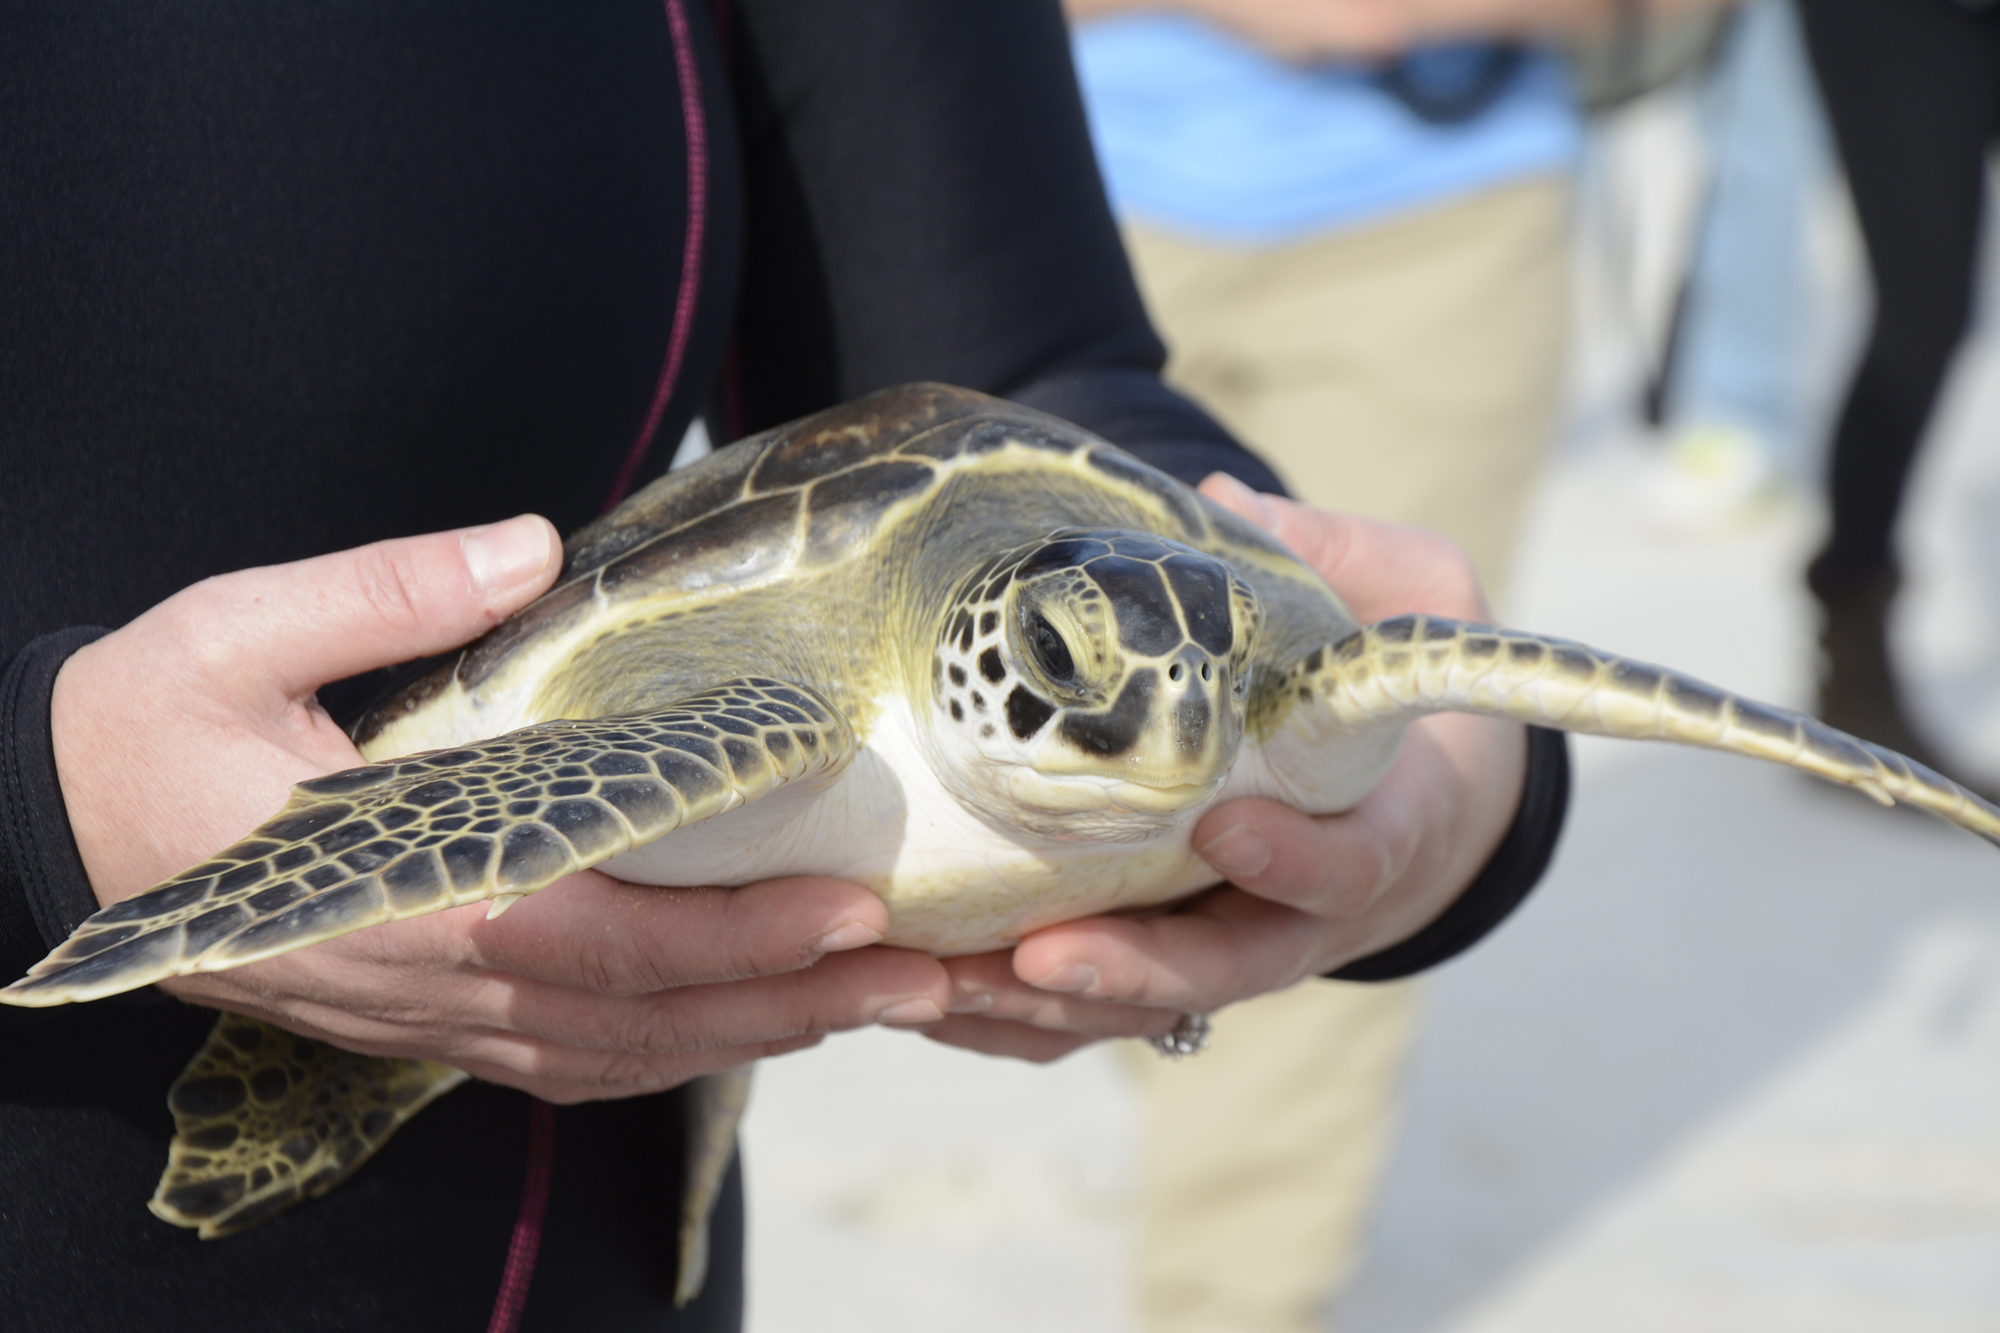 Estimated to be under five years of age, juvenile Green Sea Turtle, Micklers, was rescued and rehabilitated at the Sea Turtle Hospital at Whitney Laboratory. Now fully recovered he/she was released back into the ocean. Photos by Anastasia Pagello